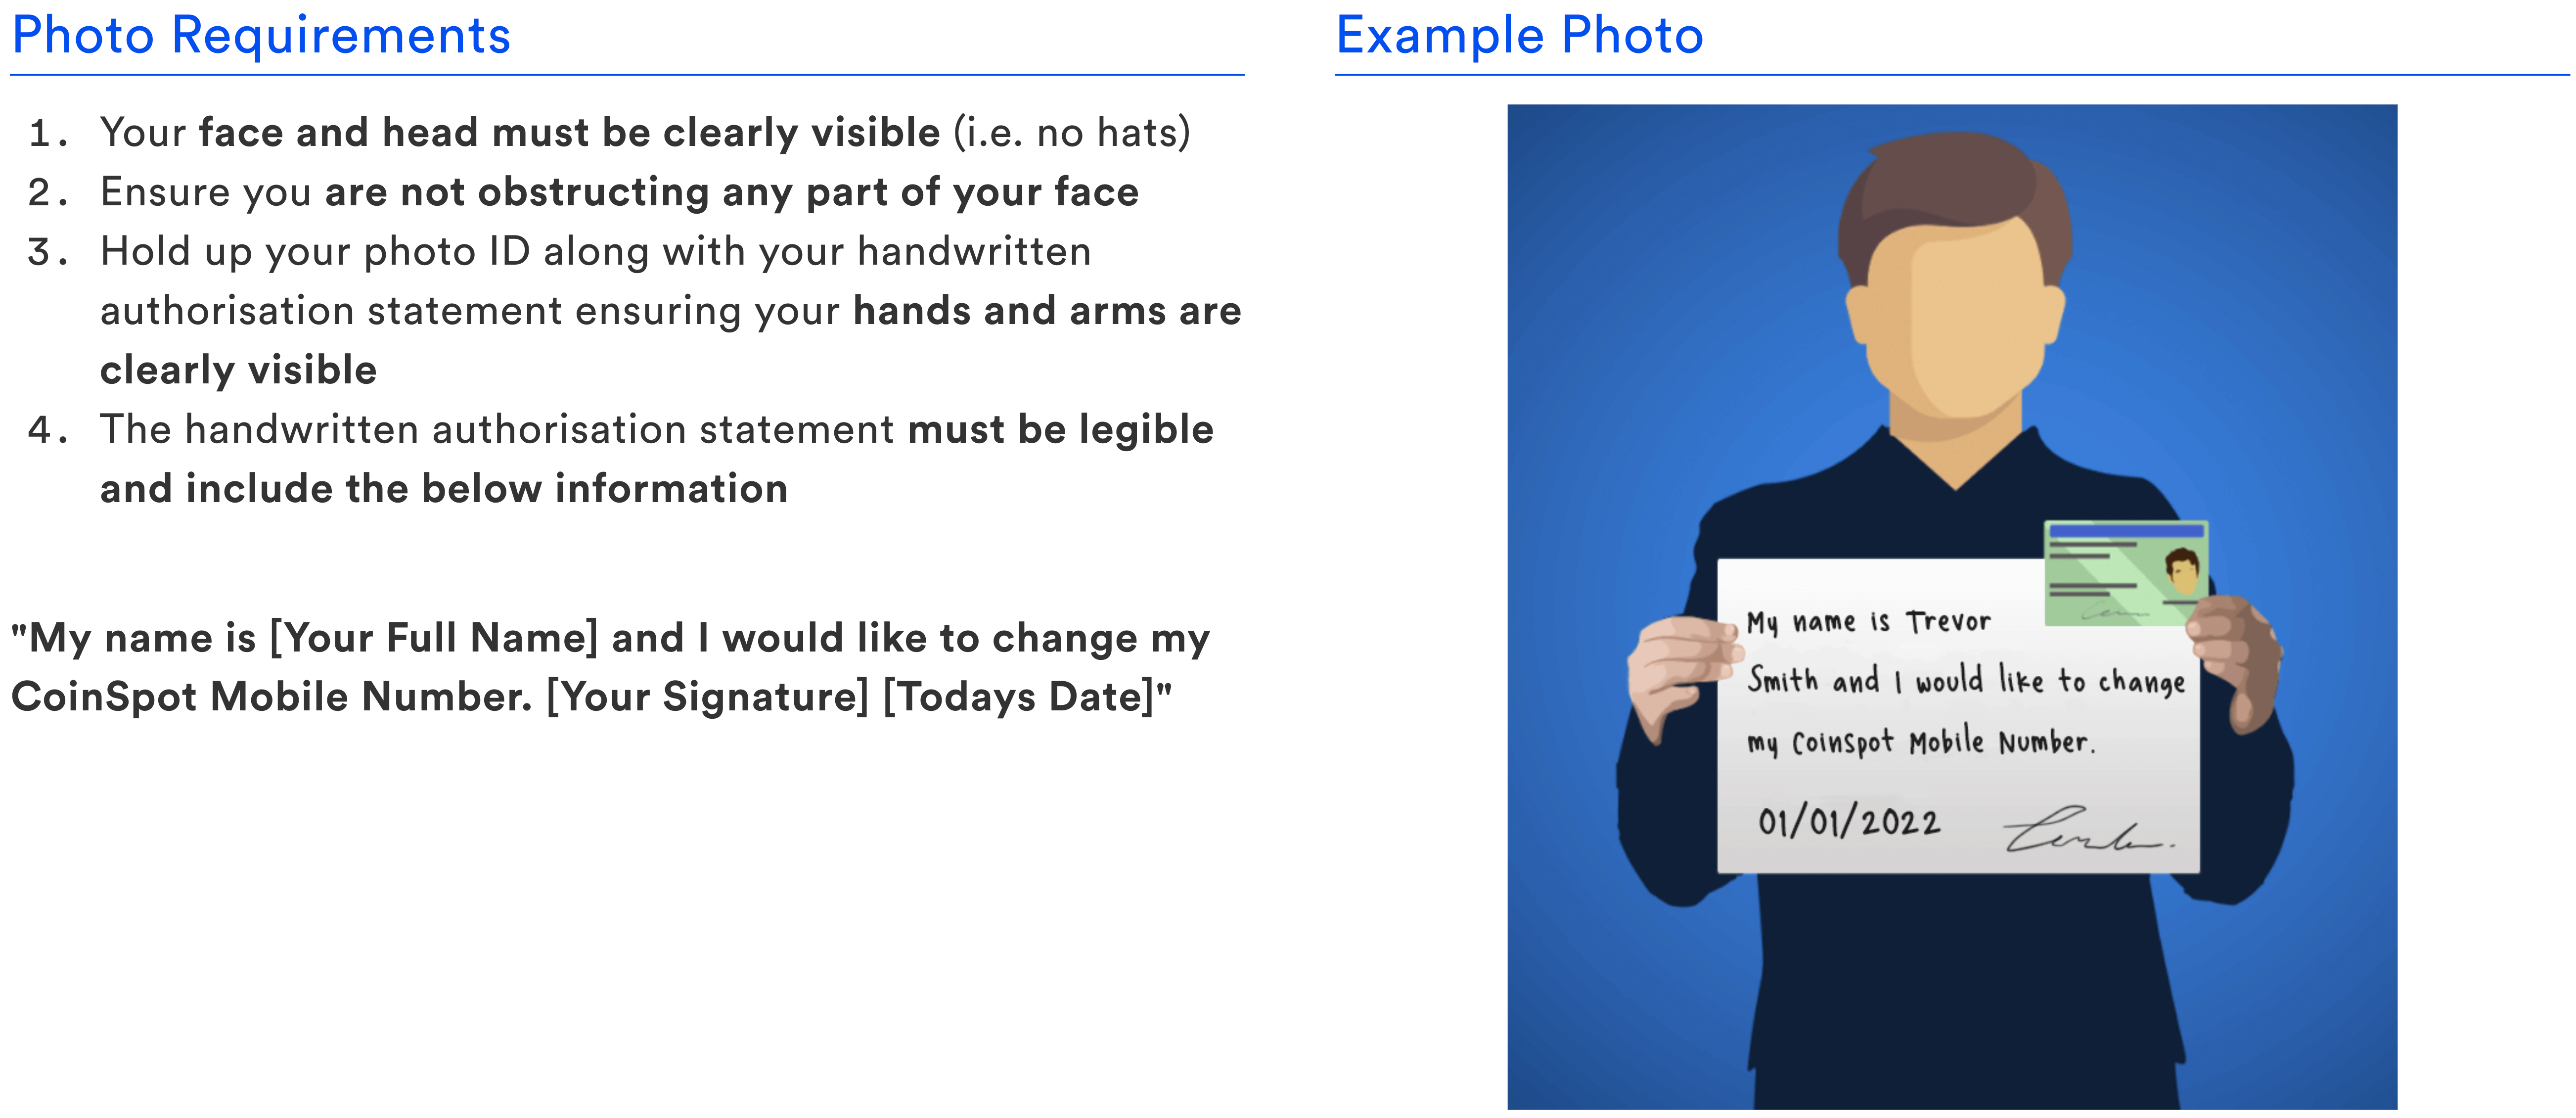 CoinSpot - Mobile Change Authorisation Photo Requirements.png